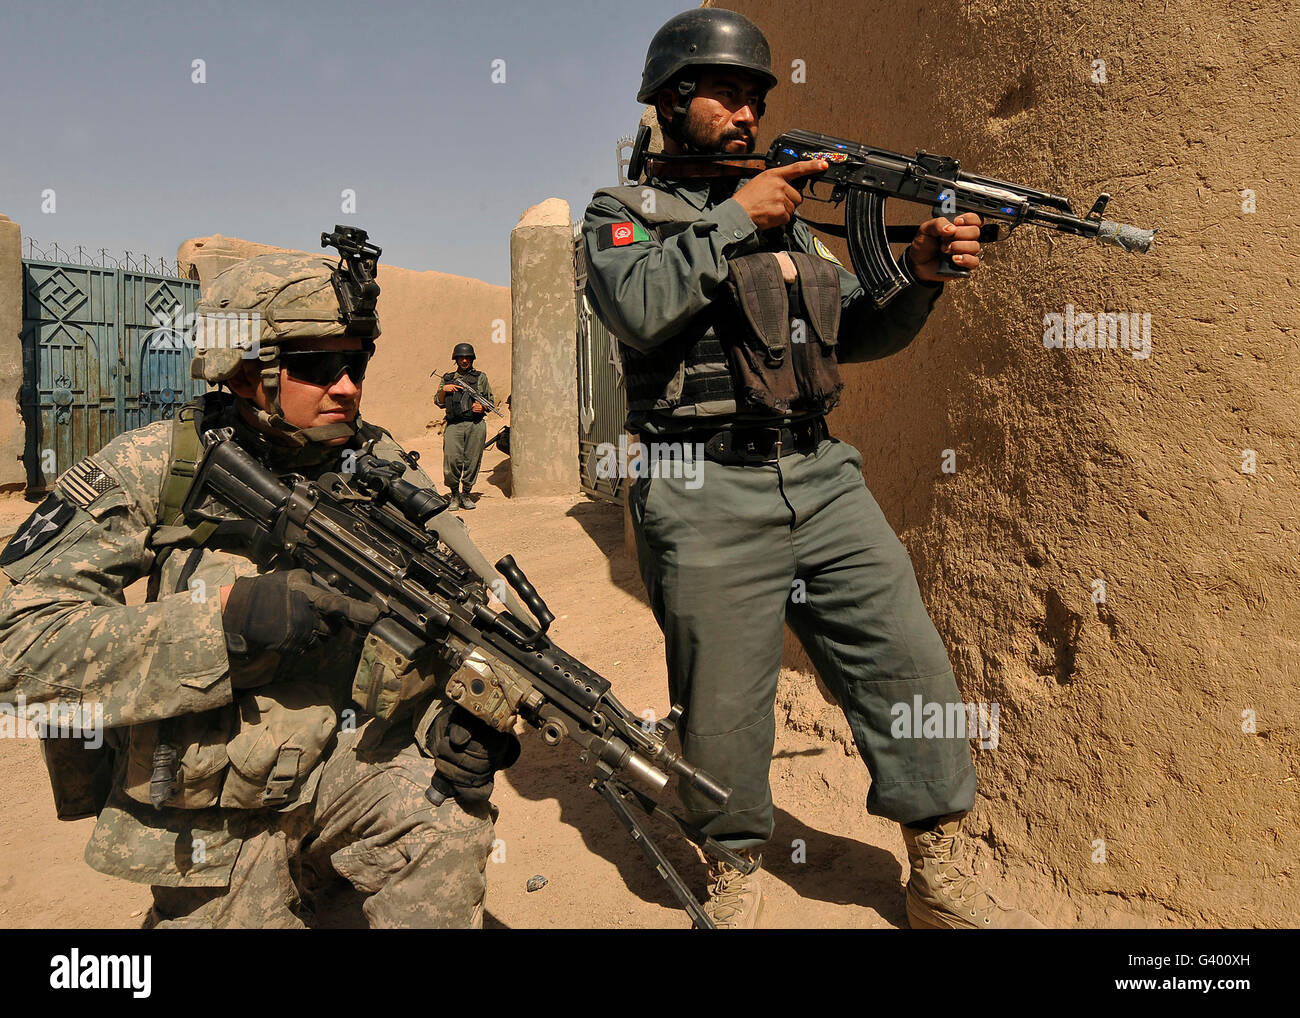 U.S. Army soldier and an Afghan National Policeman provide security during a joint patrol. Stock Photo